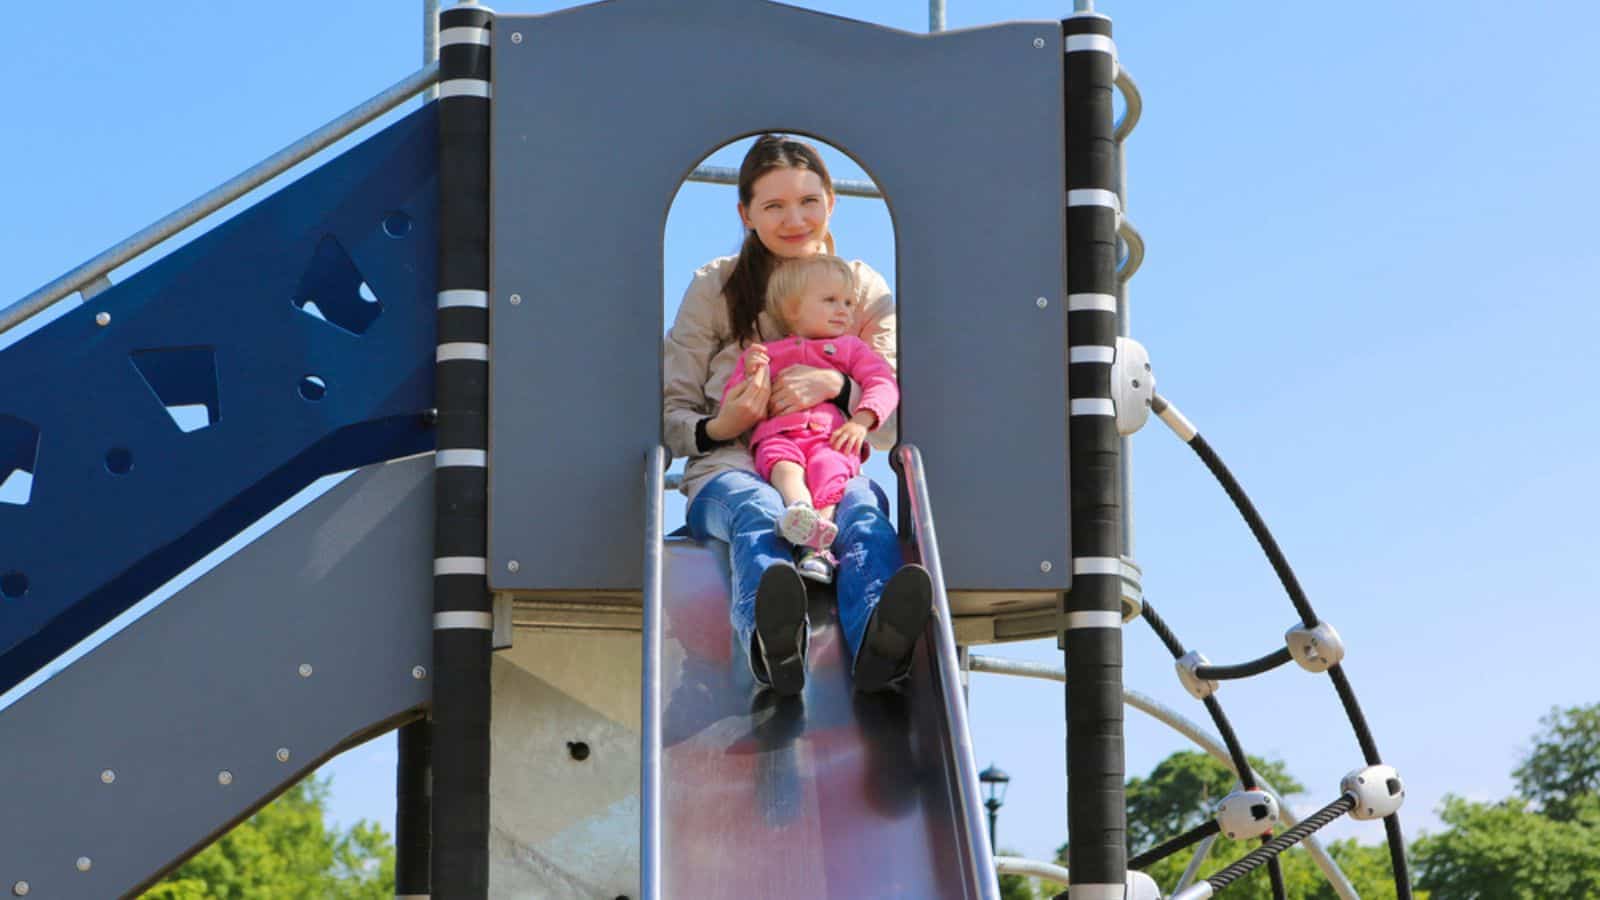 Mother with her daughter on playground